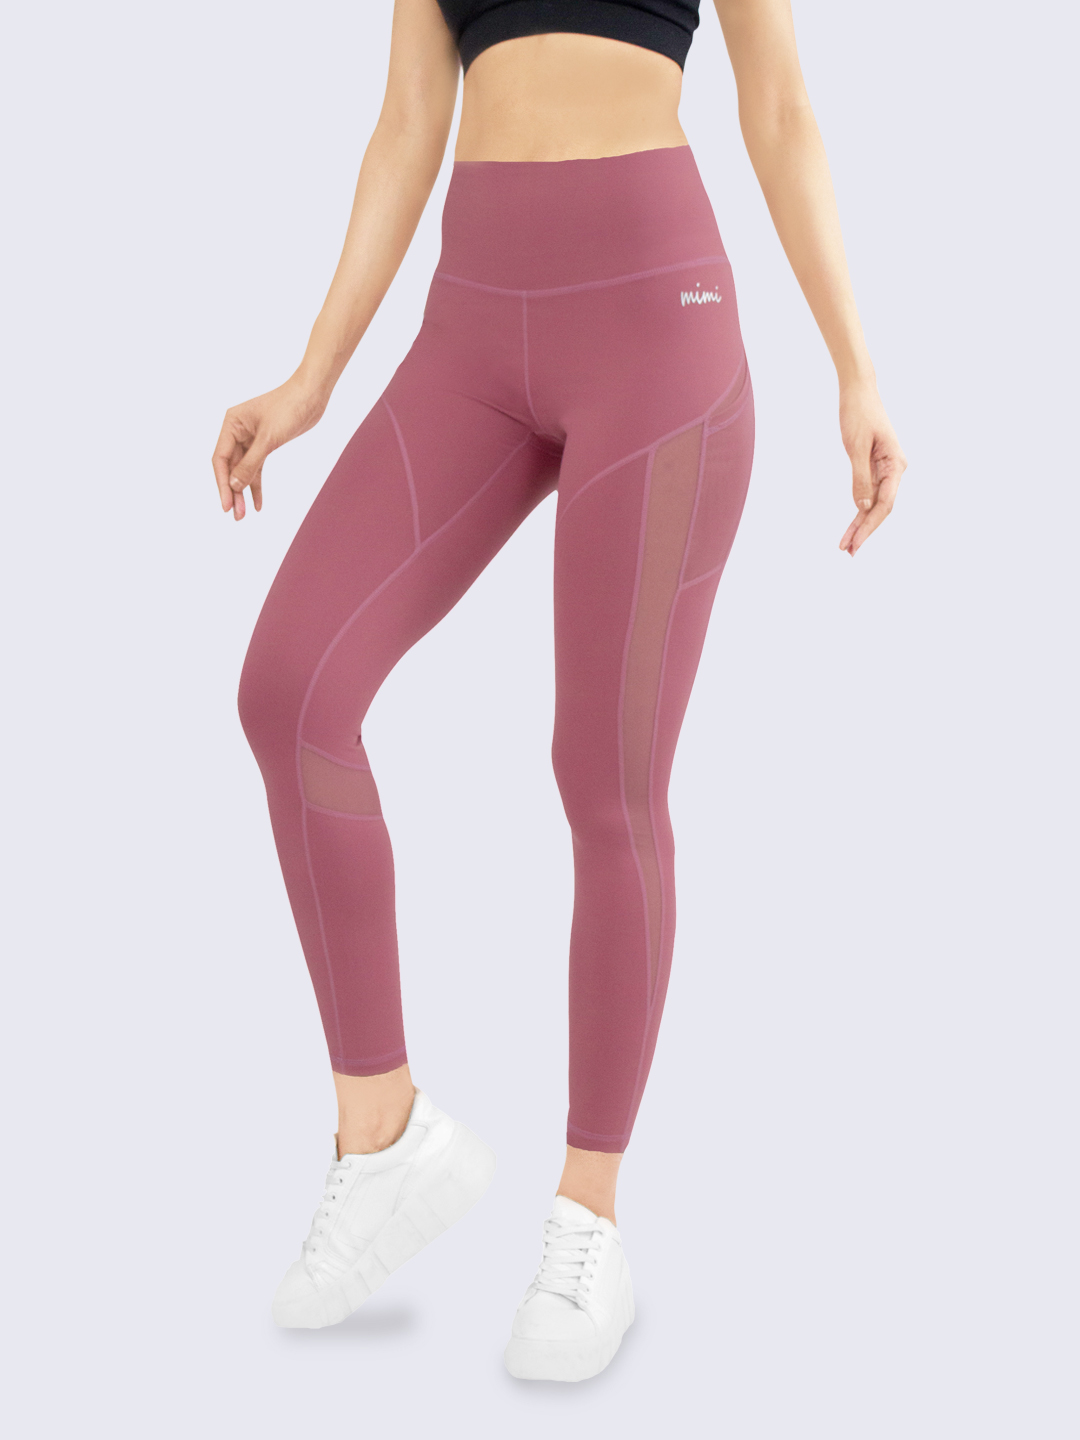 Mimi by Michelle Salins I Look Tall Full Length Nylon Leggings – Pink front view